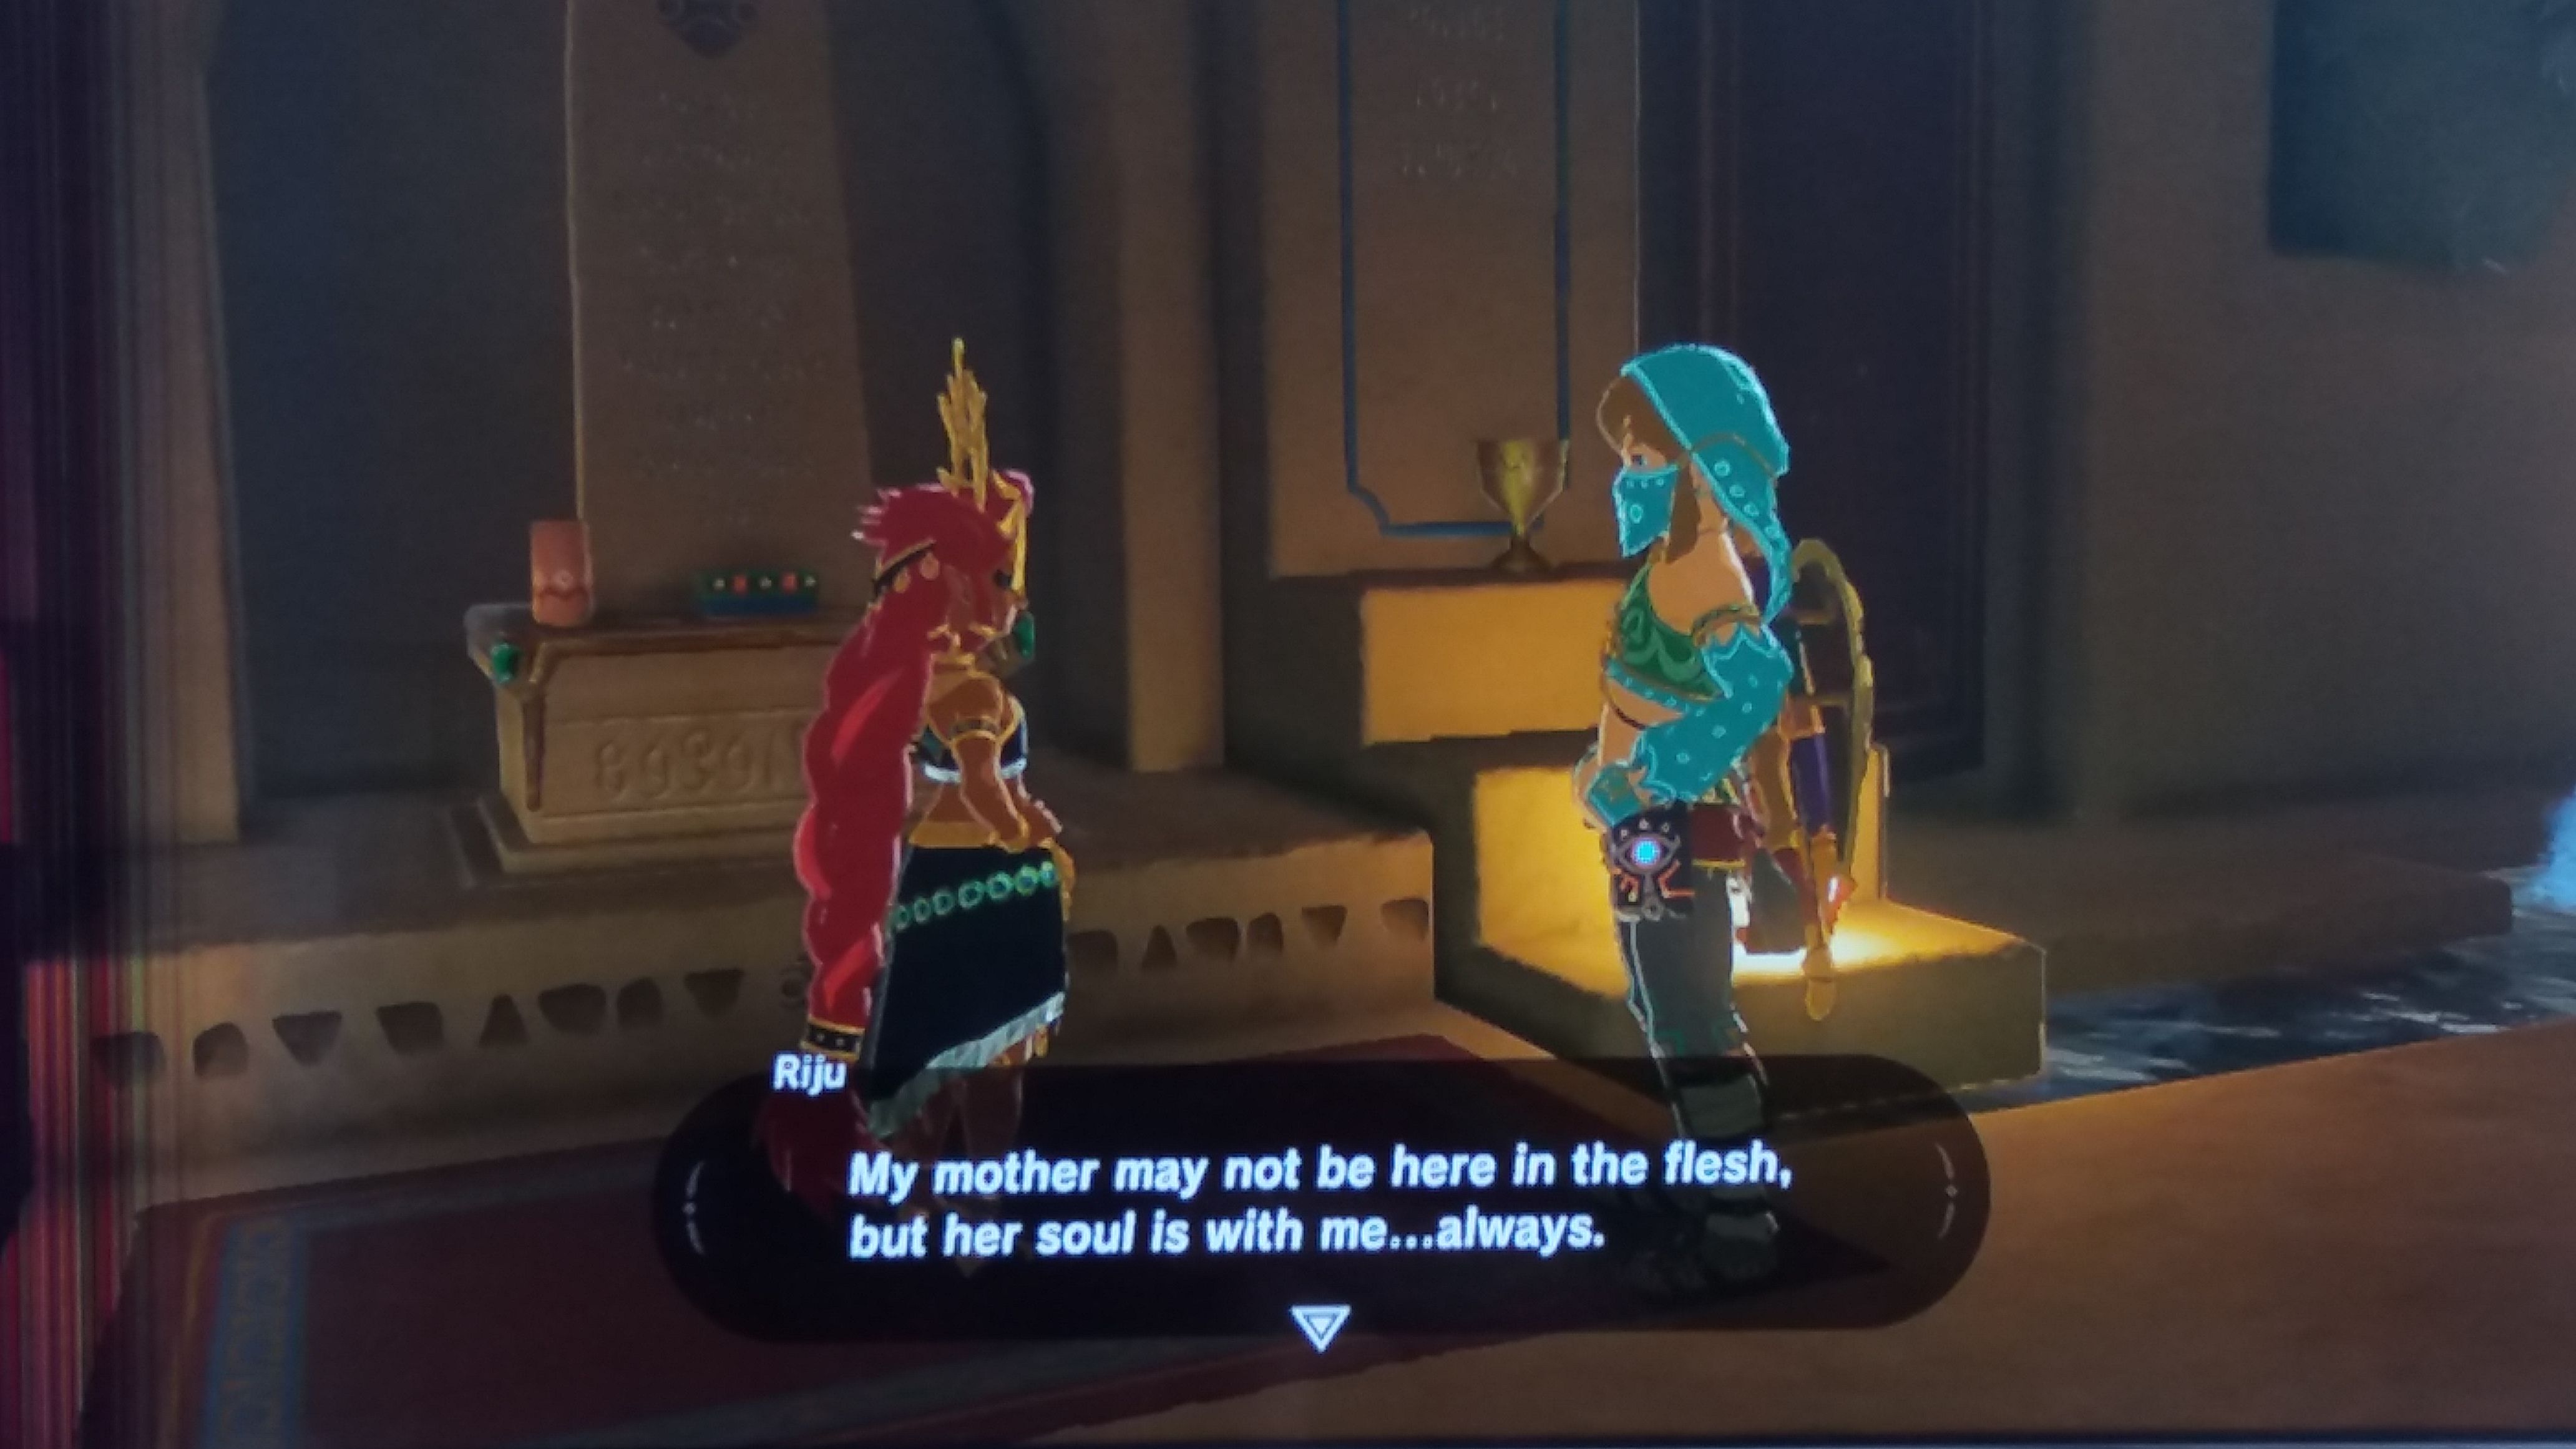 cecilia villena recommends how tall is link botw pic